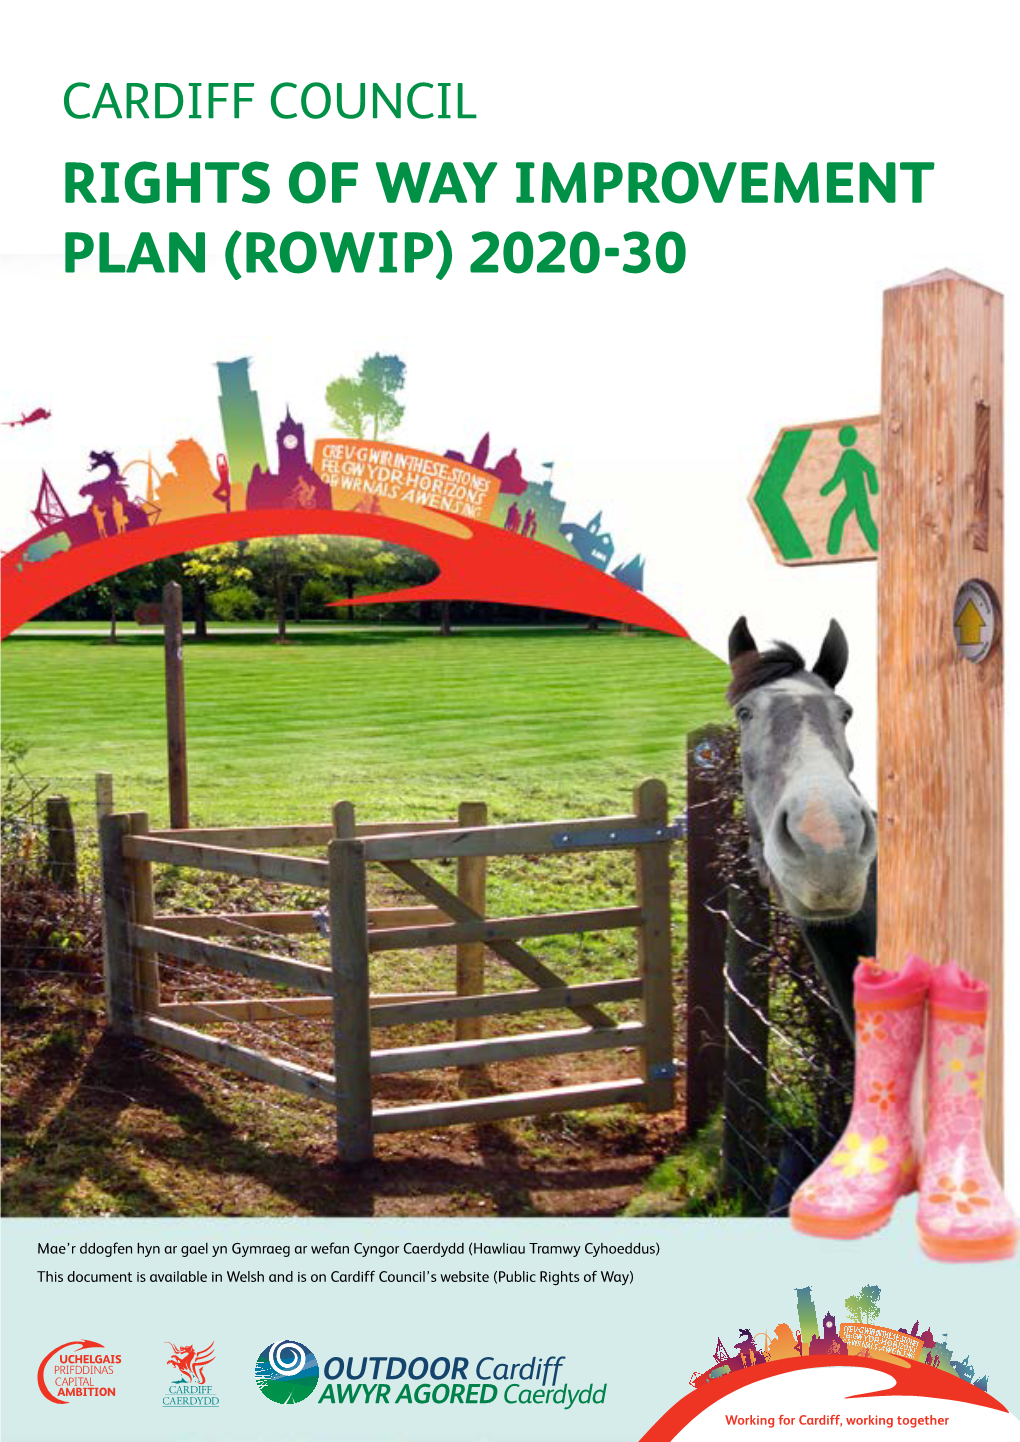 Cardiff Council Rights of Way Improvement Plan (Rowip) 2020-30